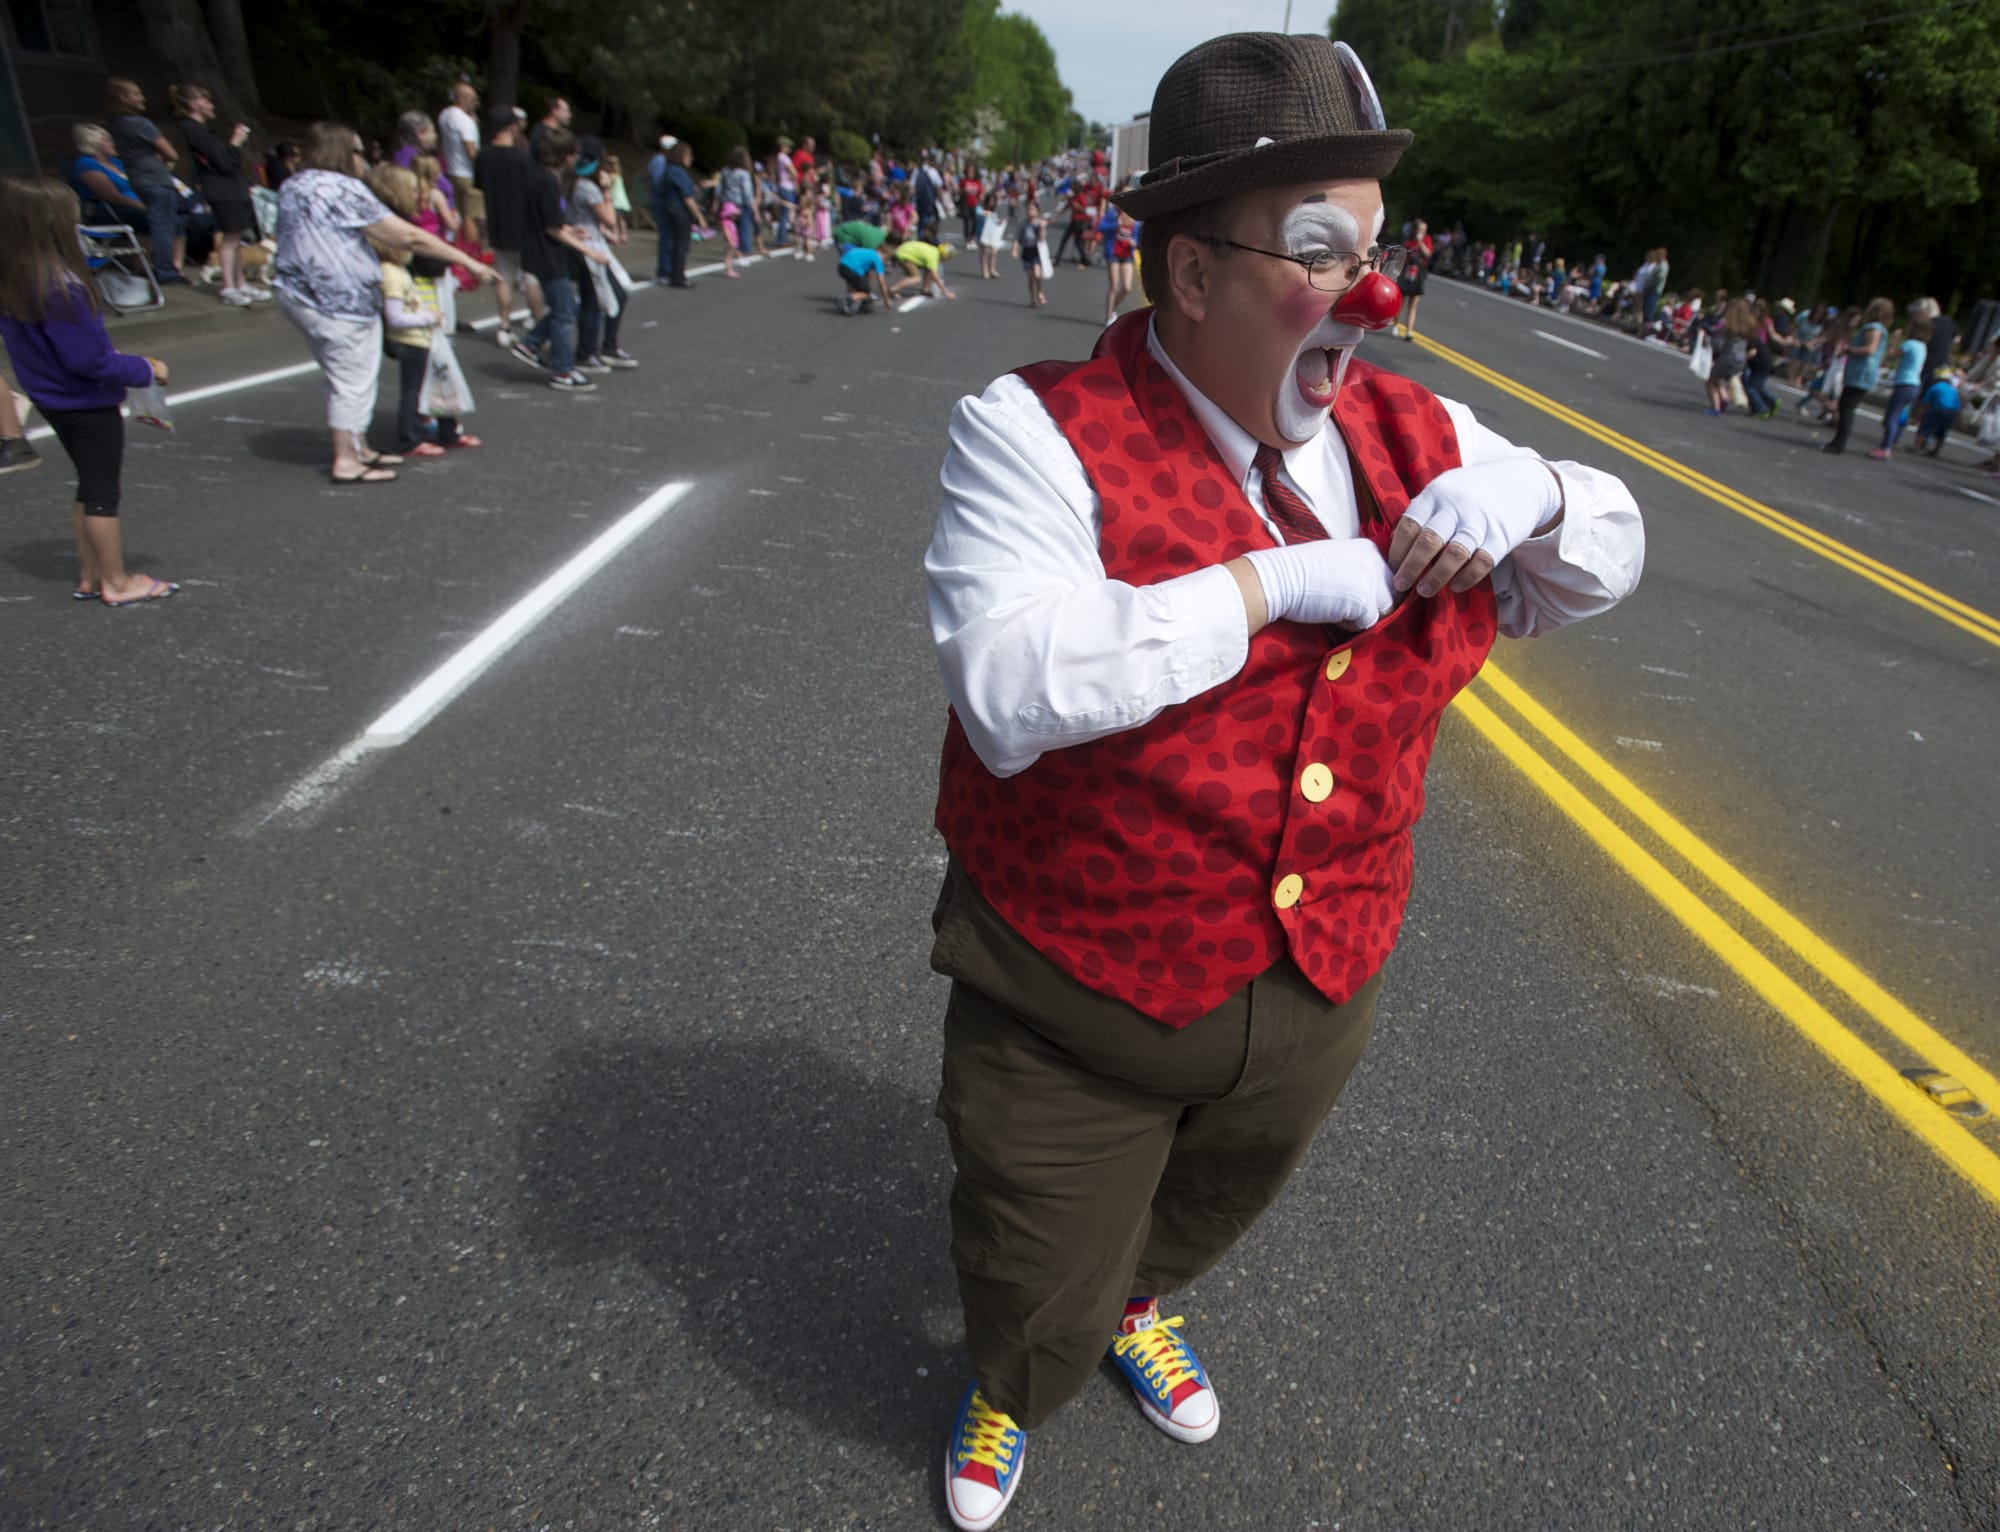 Roosevelt the Clown, otherwise known as Greg Saum of the Rose Festival Clowns, entertained a crowd Saturday at the 48th annual Hazel Dell Parade of Bands.